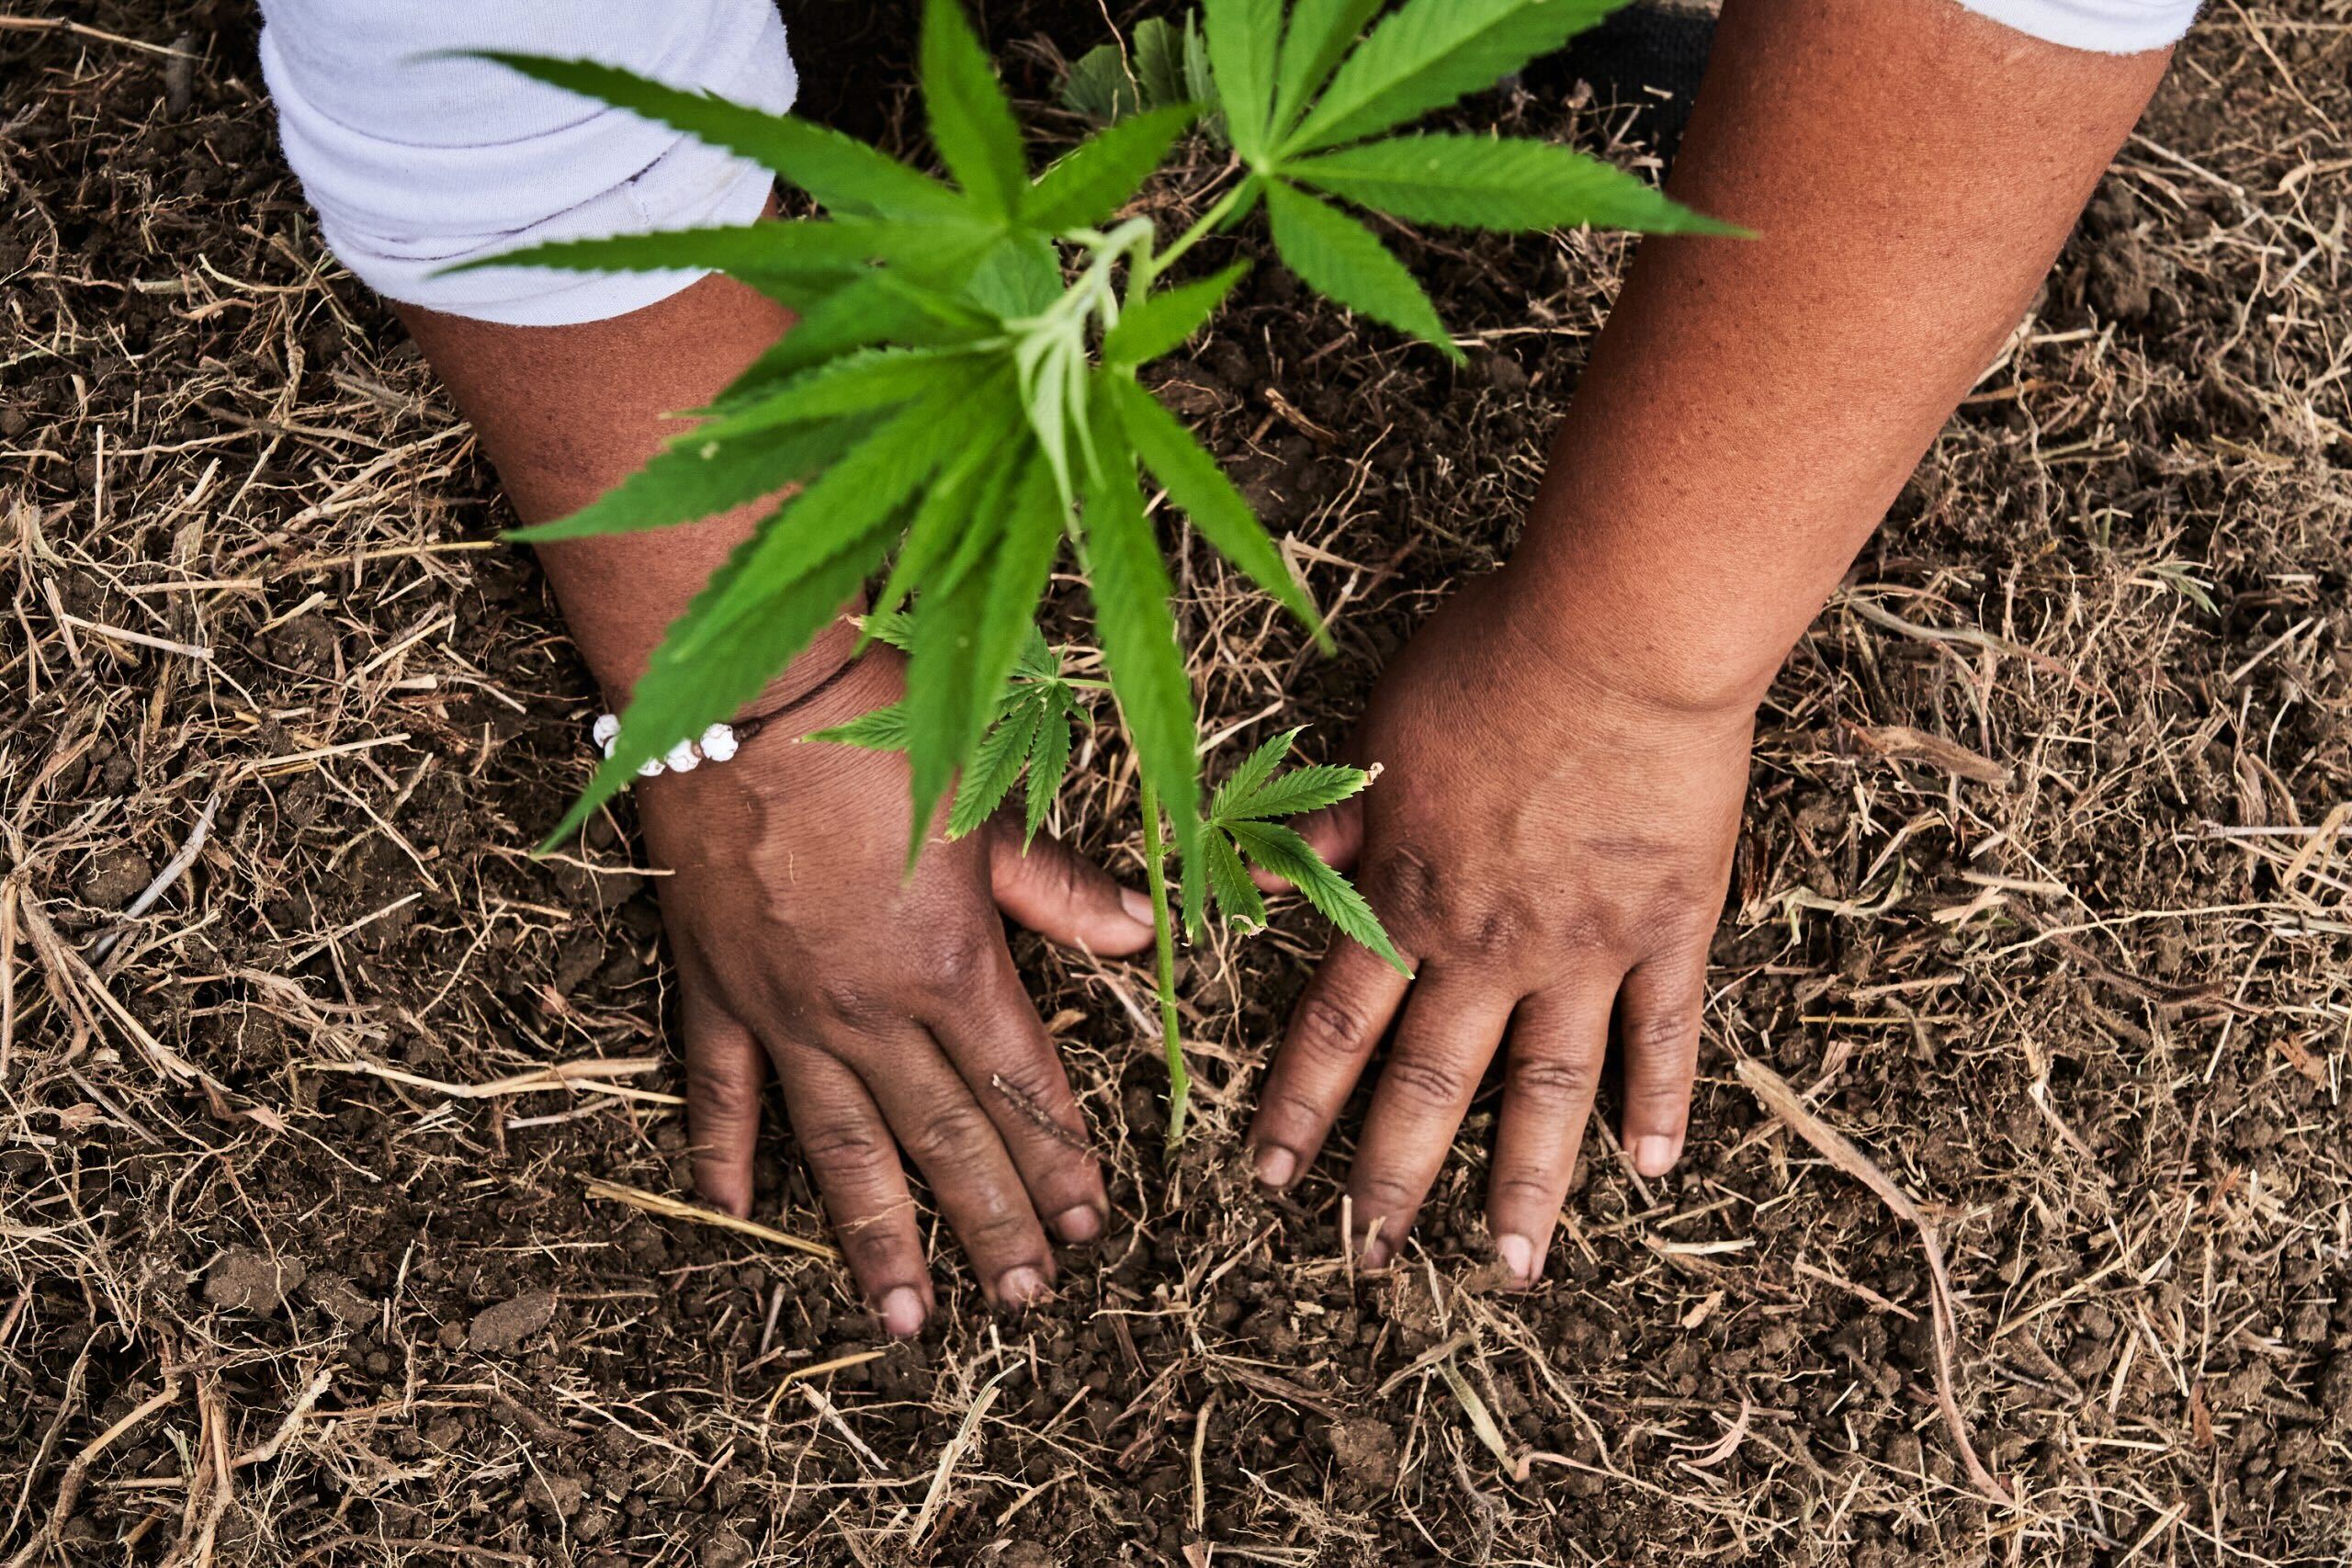 Colombia has 100-plus licensed cannabis firms, but only a handful have  registered cultivars